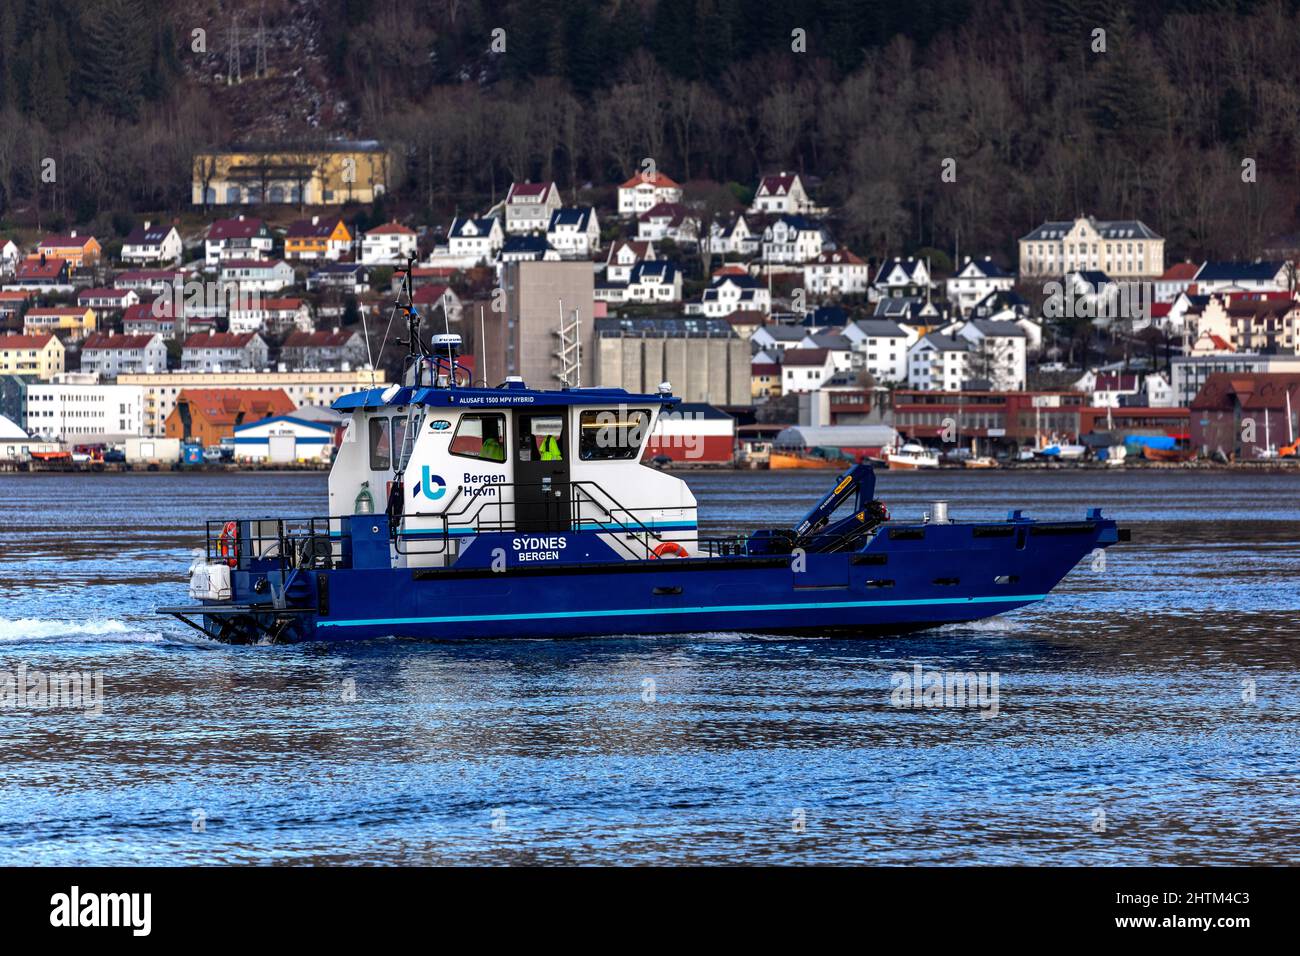 MB "Sydnes", Bergen port authority's maintenance and service boat,  in port of Bergen, Norway Stock Photo